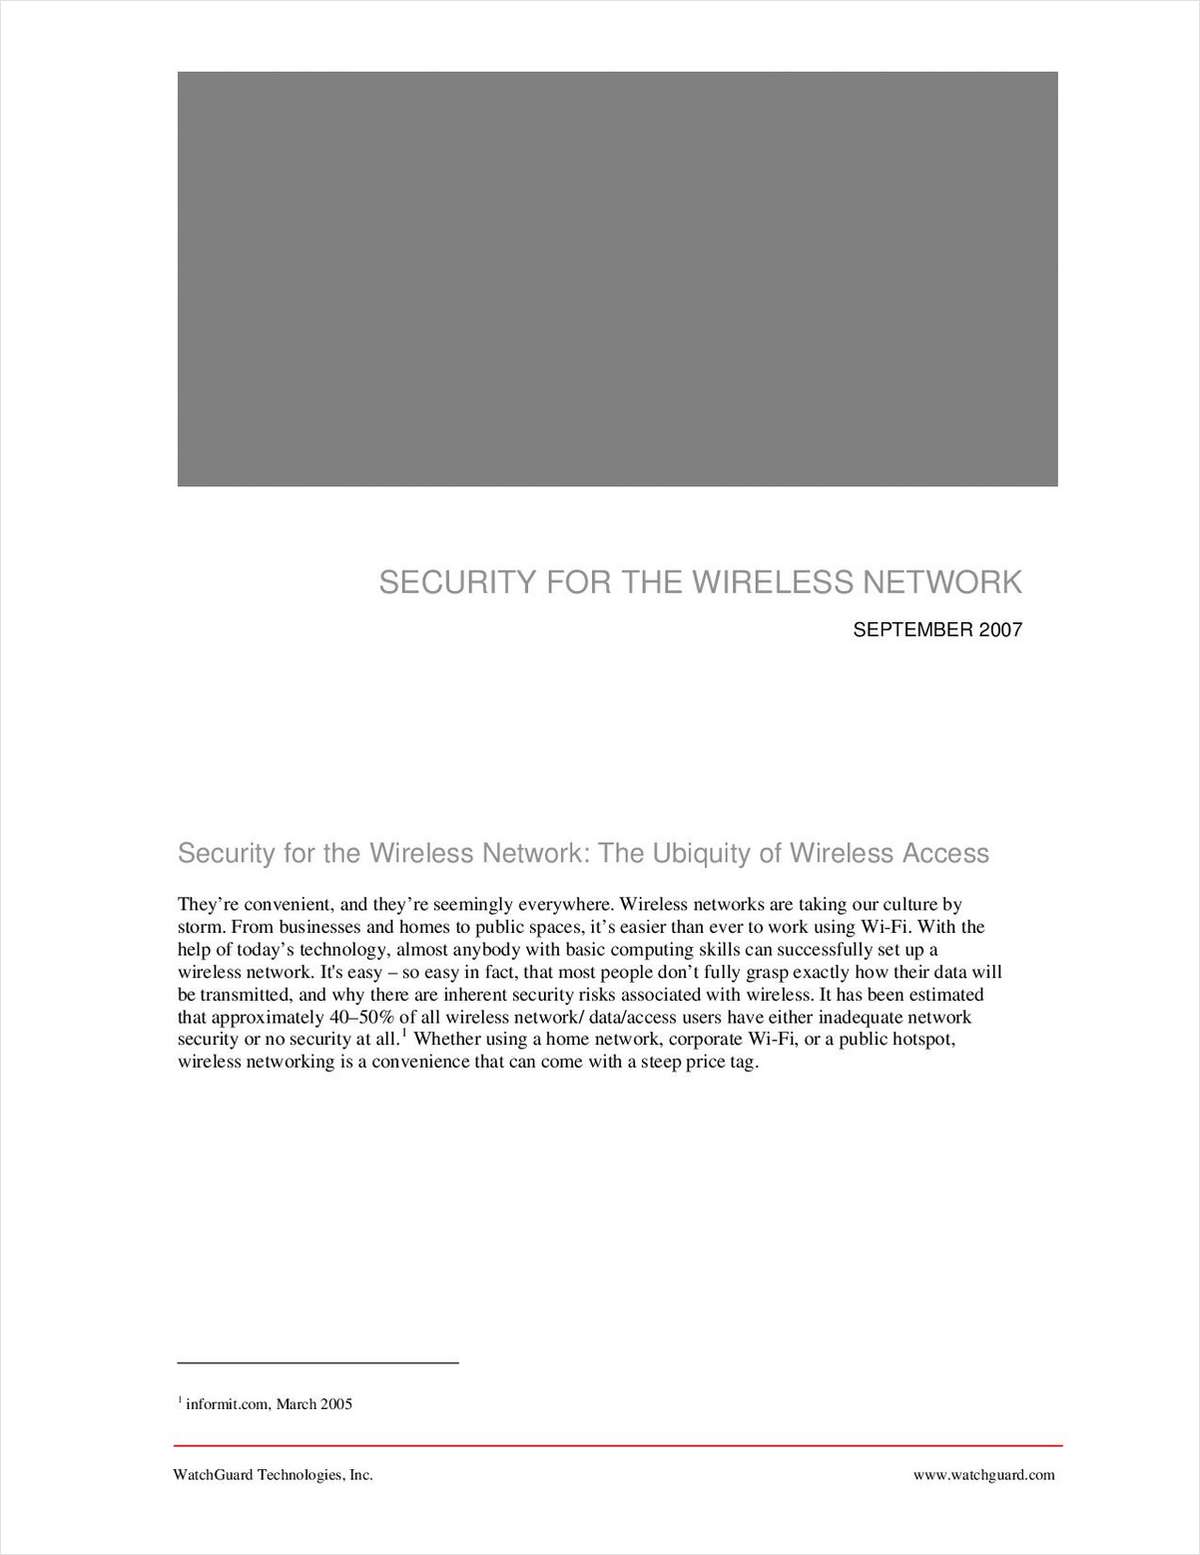 Security for the Wireless Network: The Ubiquity of Wireless Access